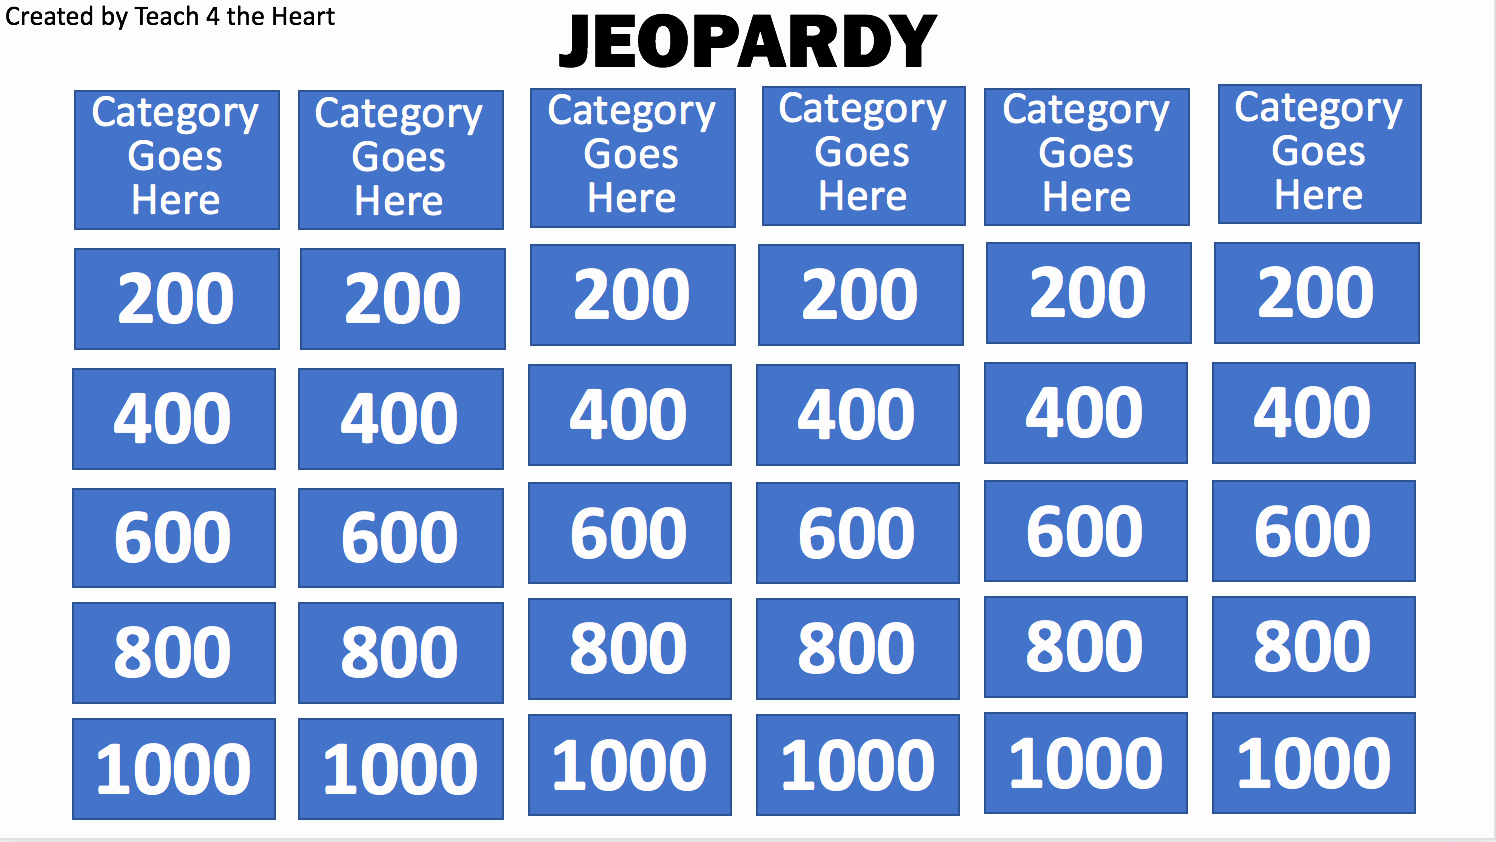 Jeopardy Game for Classrooms Fresh 7 Classroom Review Games that Won T Waste Time